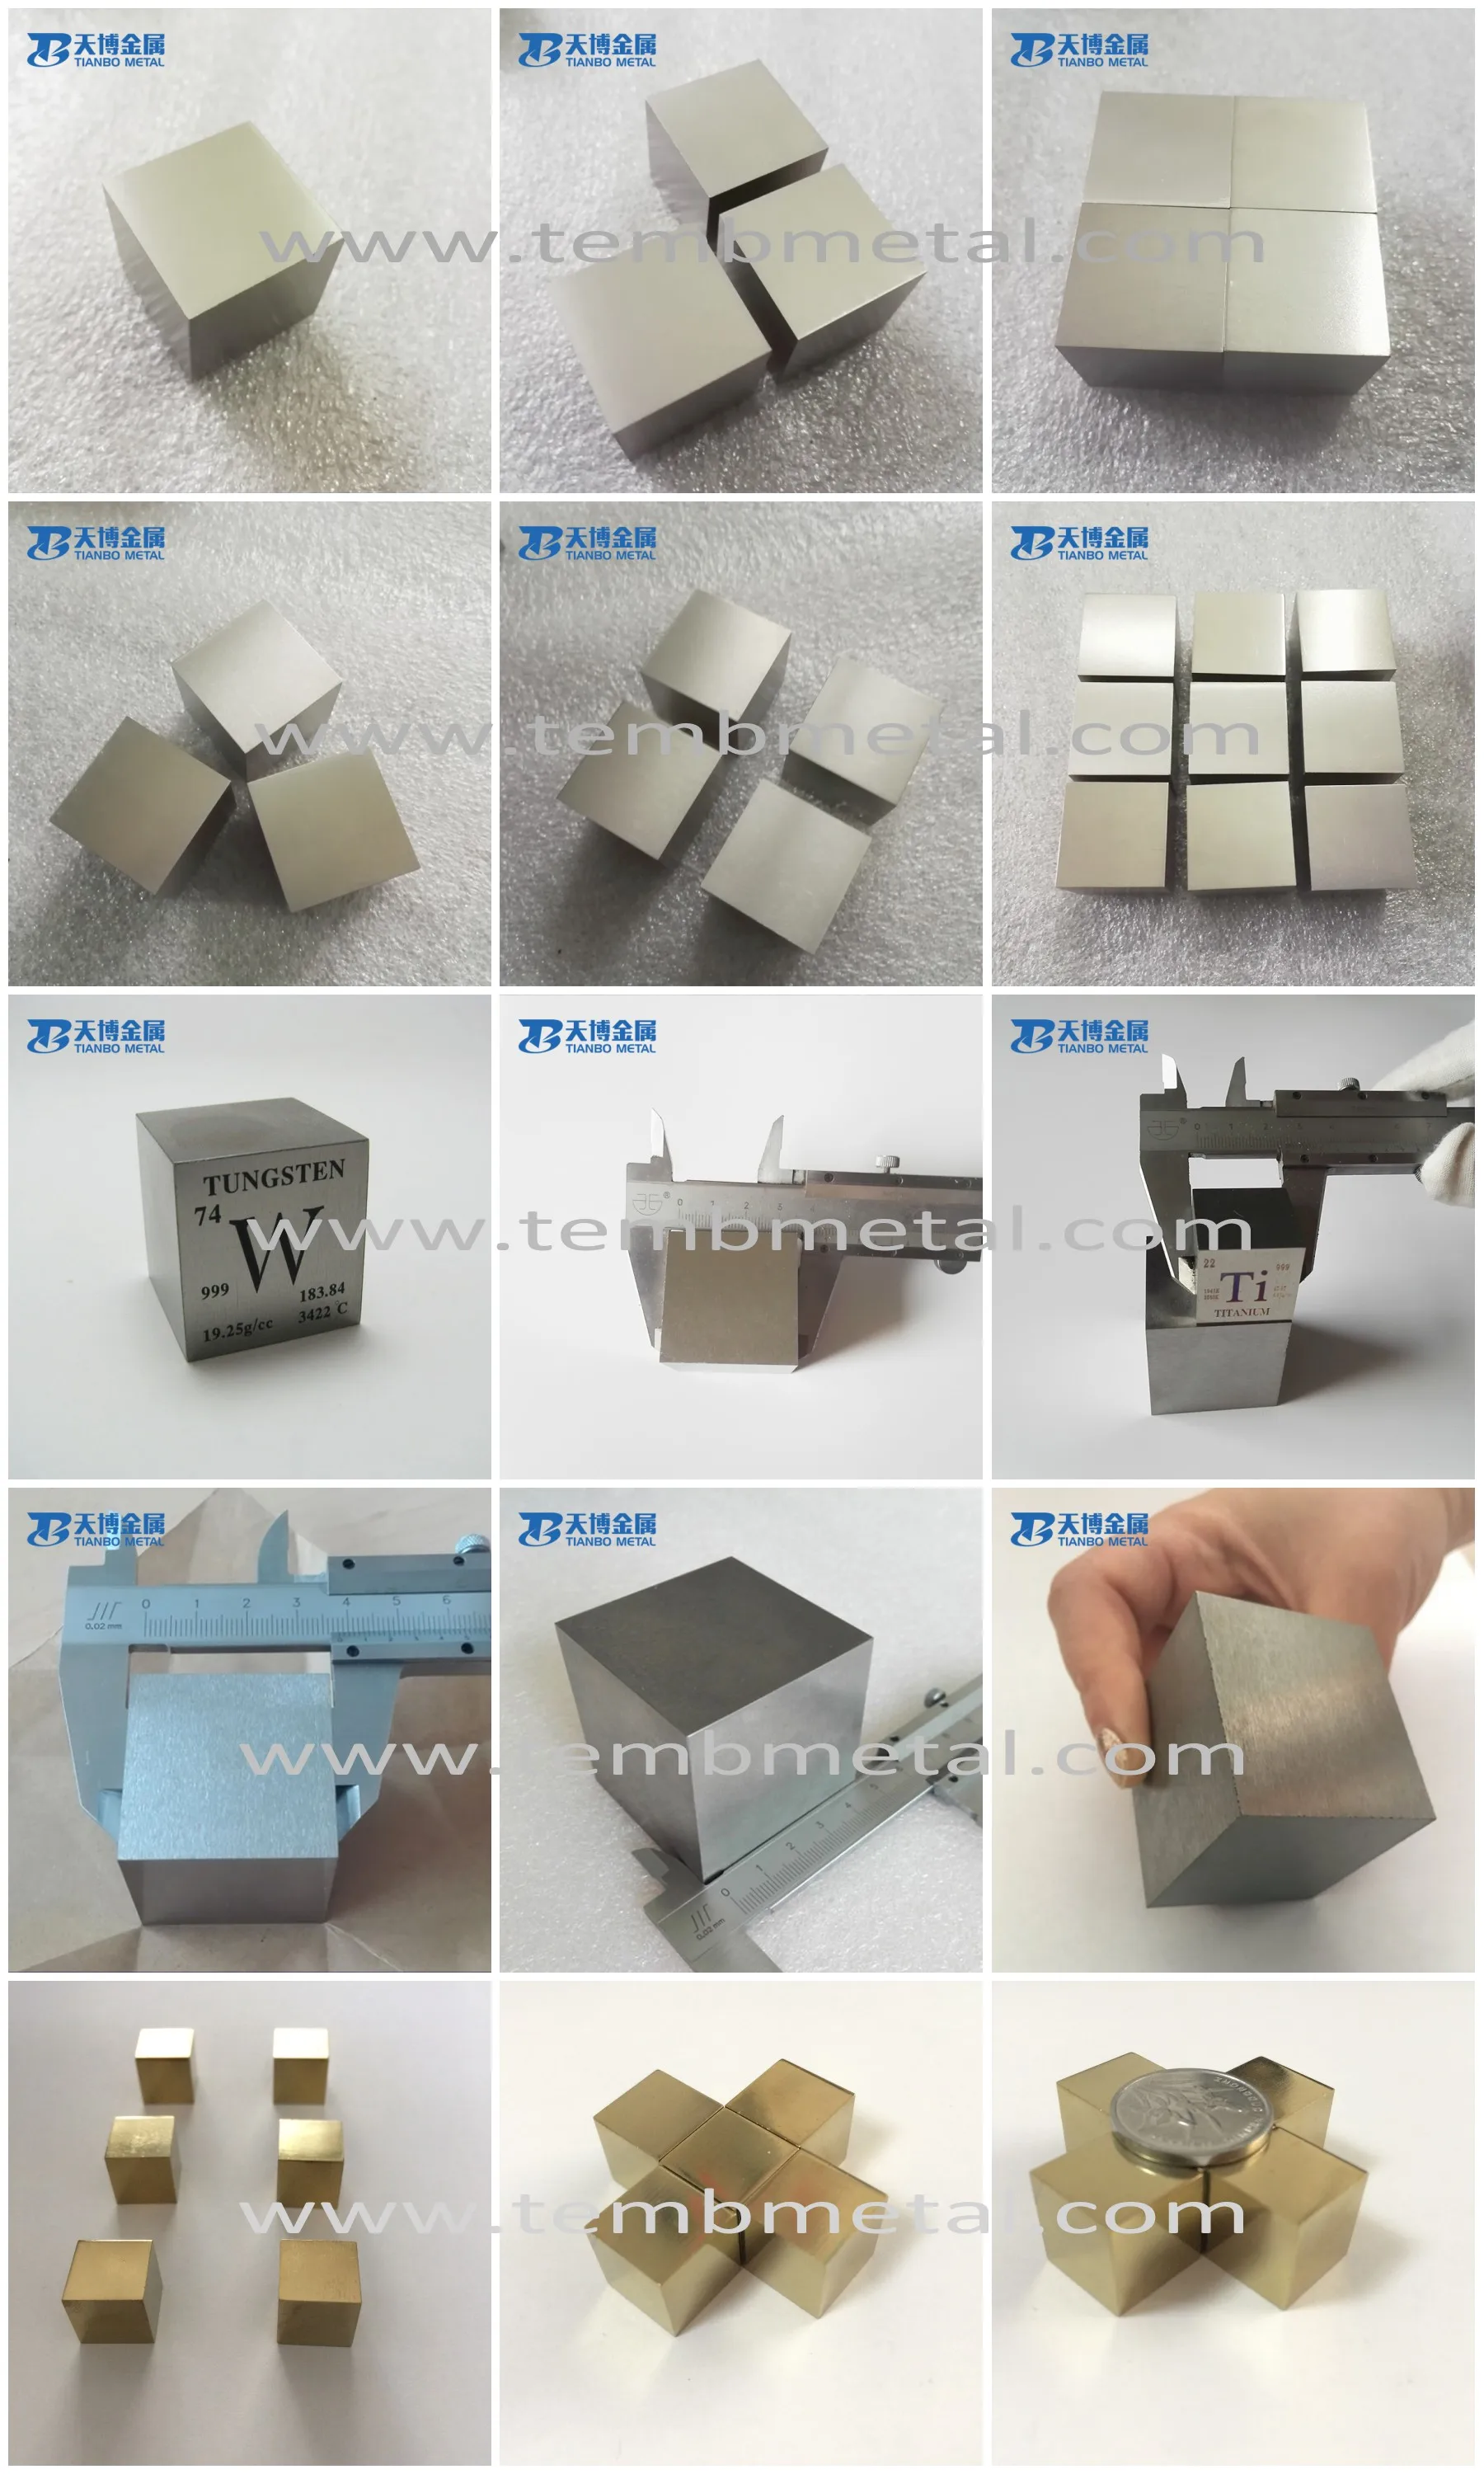 1kg Tungsten Cube Price And Polished Tungsten Ingot Metal Cube 1kg For Sale Buy 1kg Tungsten Cube Price 1kg Tungsten Cube Price Tungsten Cube 1kg For Sale Product On Alibaba Com